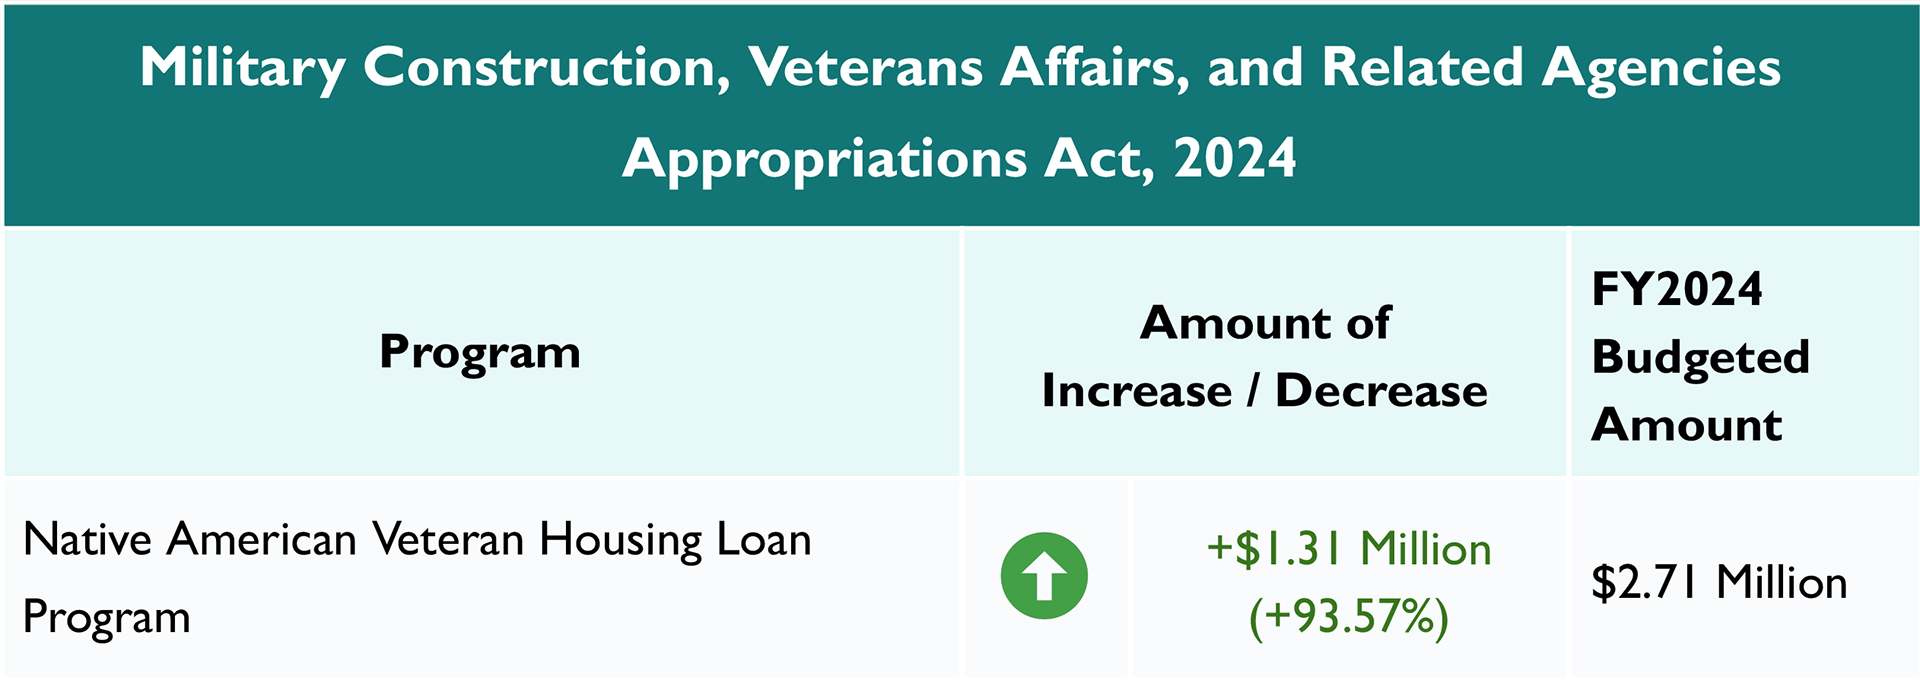 Military Construction, Veterans Affairs, and Related Agencies Appropriations Act, 2024